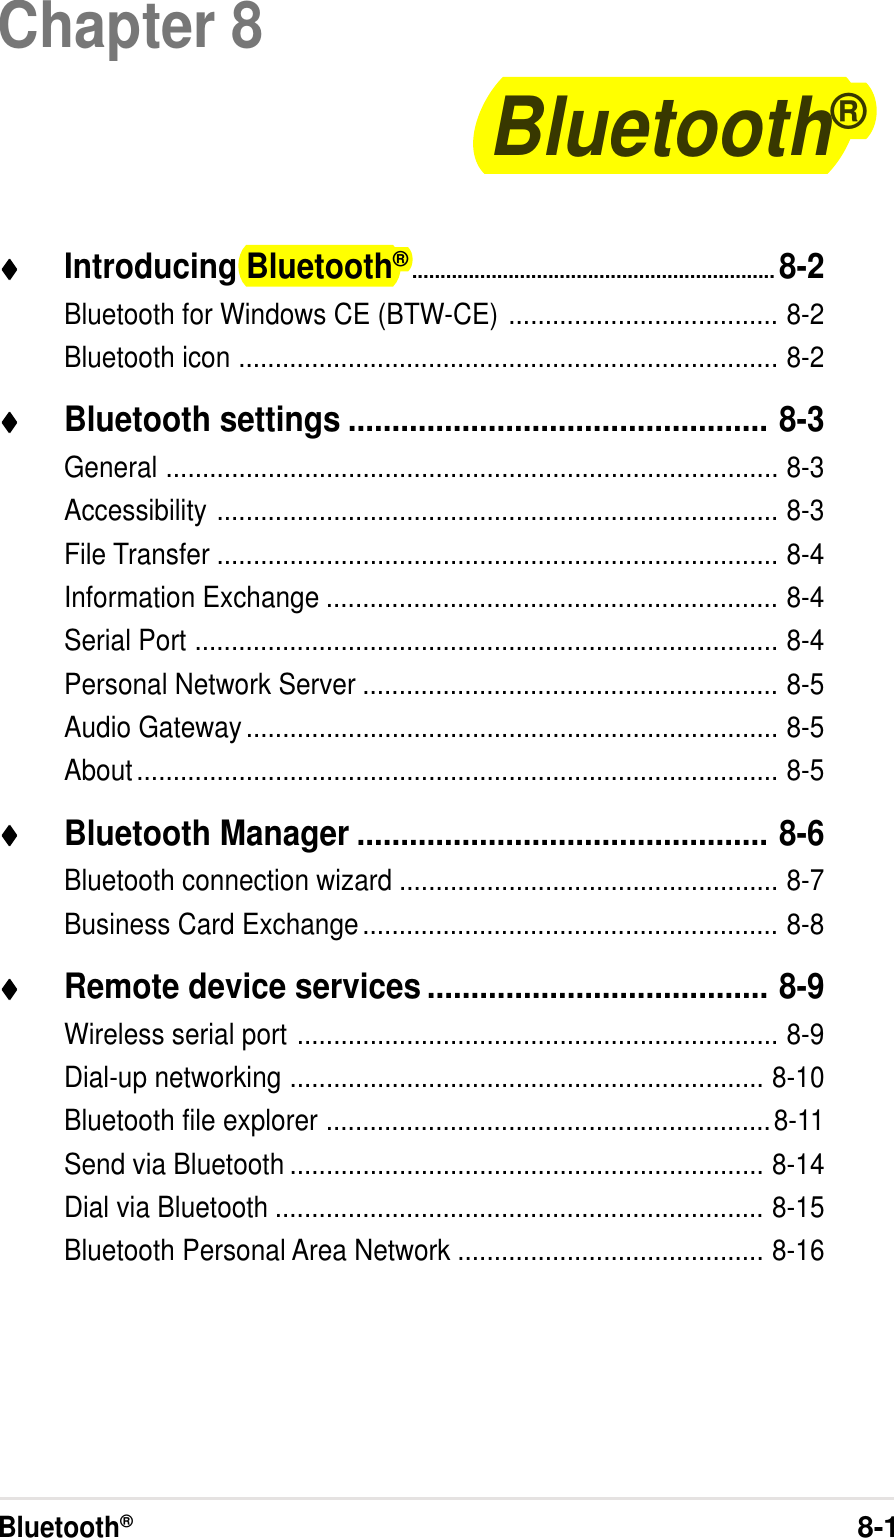 Bluetooth®8-1Chapter 8Bluetooth®♦♦♦♦♦Introducing Bluetooth®................................................................8-2Bluetooth for Windows CE (BTW-CE) ..................................... 8-2Bluetooth icon .......................................................................... 8-2♦♦♦♦♦Bluetooth settings ................................................ 8-3General .................................................................................... 8-3Accessibility ............................................................................. 8-3File Transfer ............................................................................. 8-4Information Exchange .............................................................. 8-4Serial Port ................................................................................ 8-4Personal Network Server ......................................................... 8-5Audio Gateway......................................................................... 8-5About........................................................................................ 8-5♦♦♦♦♦Bluetooth Manager ............................................... 8-6Bluetooth connection wizard .................................................... 8-7Business Card Exchange......................................................... 8-8♦♦♦♦♦Remote device services ....................................... 8-9Wireless serial port .................................................................. 8-9Dial-up networking ................................................................. 8-10Bluetooth file explorer .............................................................8-11Send via Bluetooth ................................................................. 8-14Dial via Bluetooth ................................................................... 8-15Bluetooth Personal Area Network .......................................... 8-16